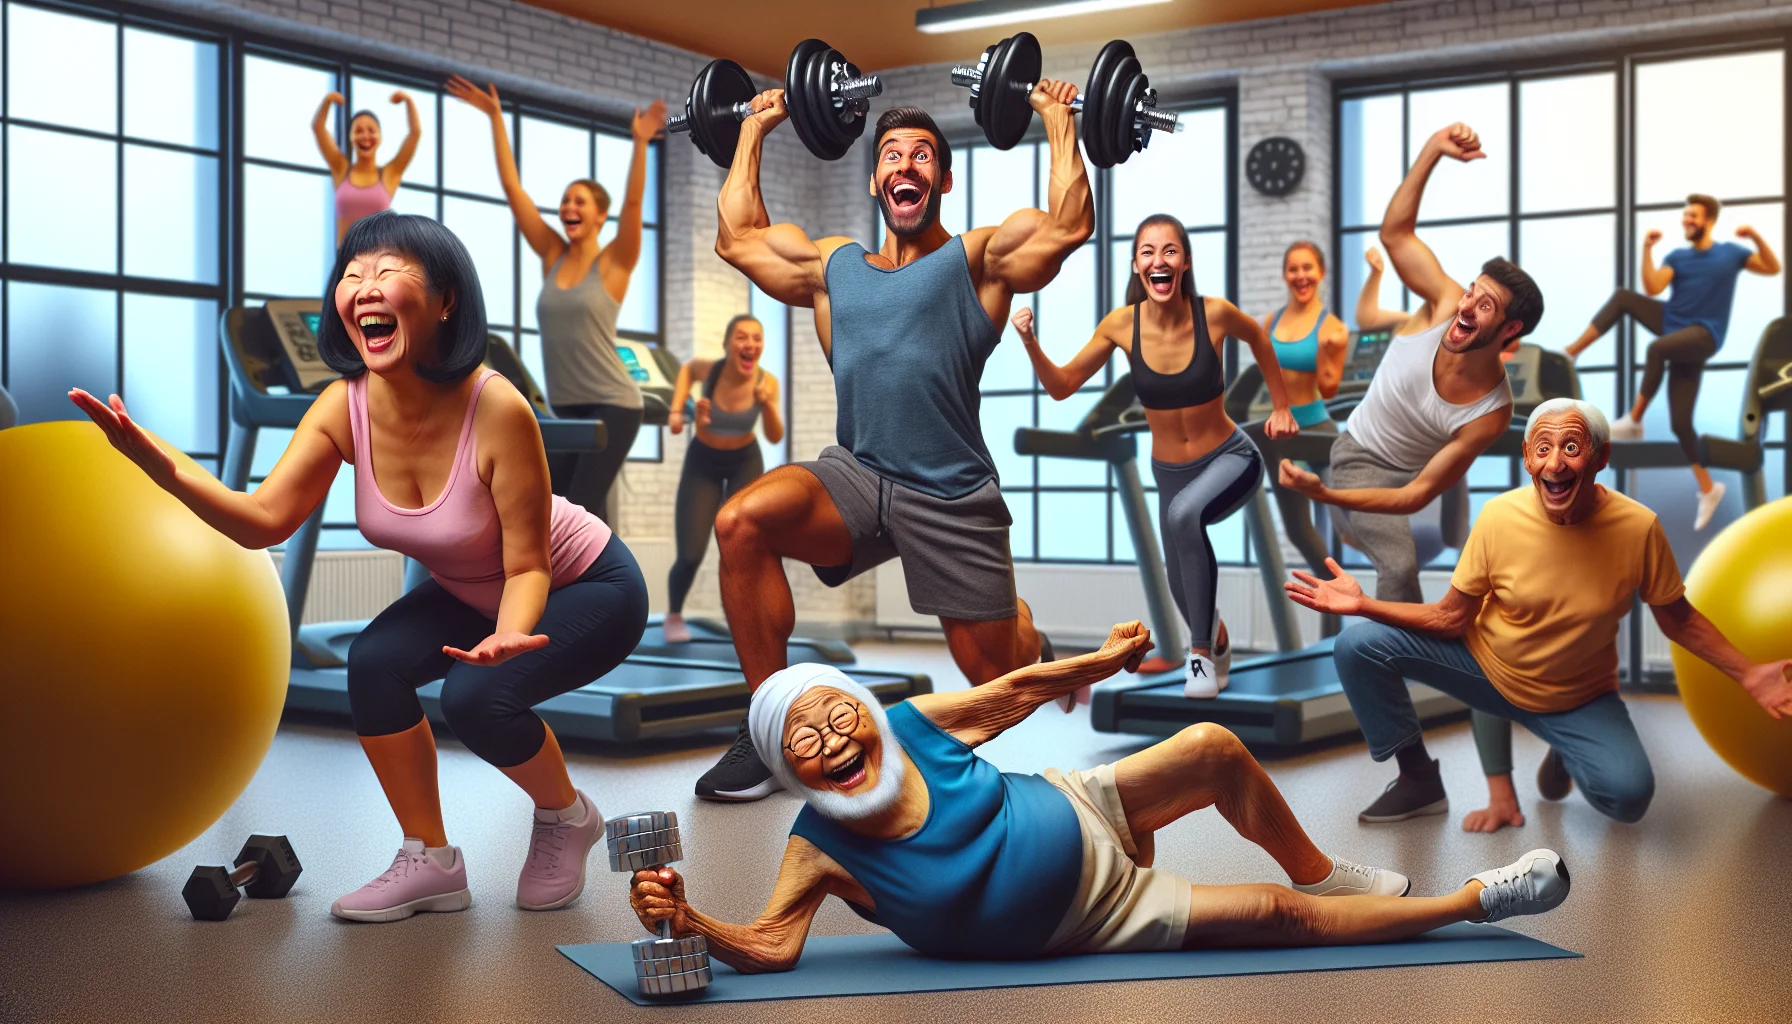 Imagine a hilariously engaging scenario that inspires people to take up physical fitness. Picture this: In a brightly lit gym, a Caucasian male fitness coach effortlessly lifts heavy dumbbells, while an elderly Asian woman, surprising everyone, performs Yoga with more flexibility than a teenager. Excitedly, a Black female and a Middle Eastern guy in their mid-twenties excitedly compete to finish off their reps on the treadmill. All around, people of various ages and body types are inspired and laughing, enjoying the infectious positive energy that promotes a healthy lifestyle.